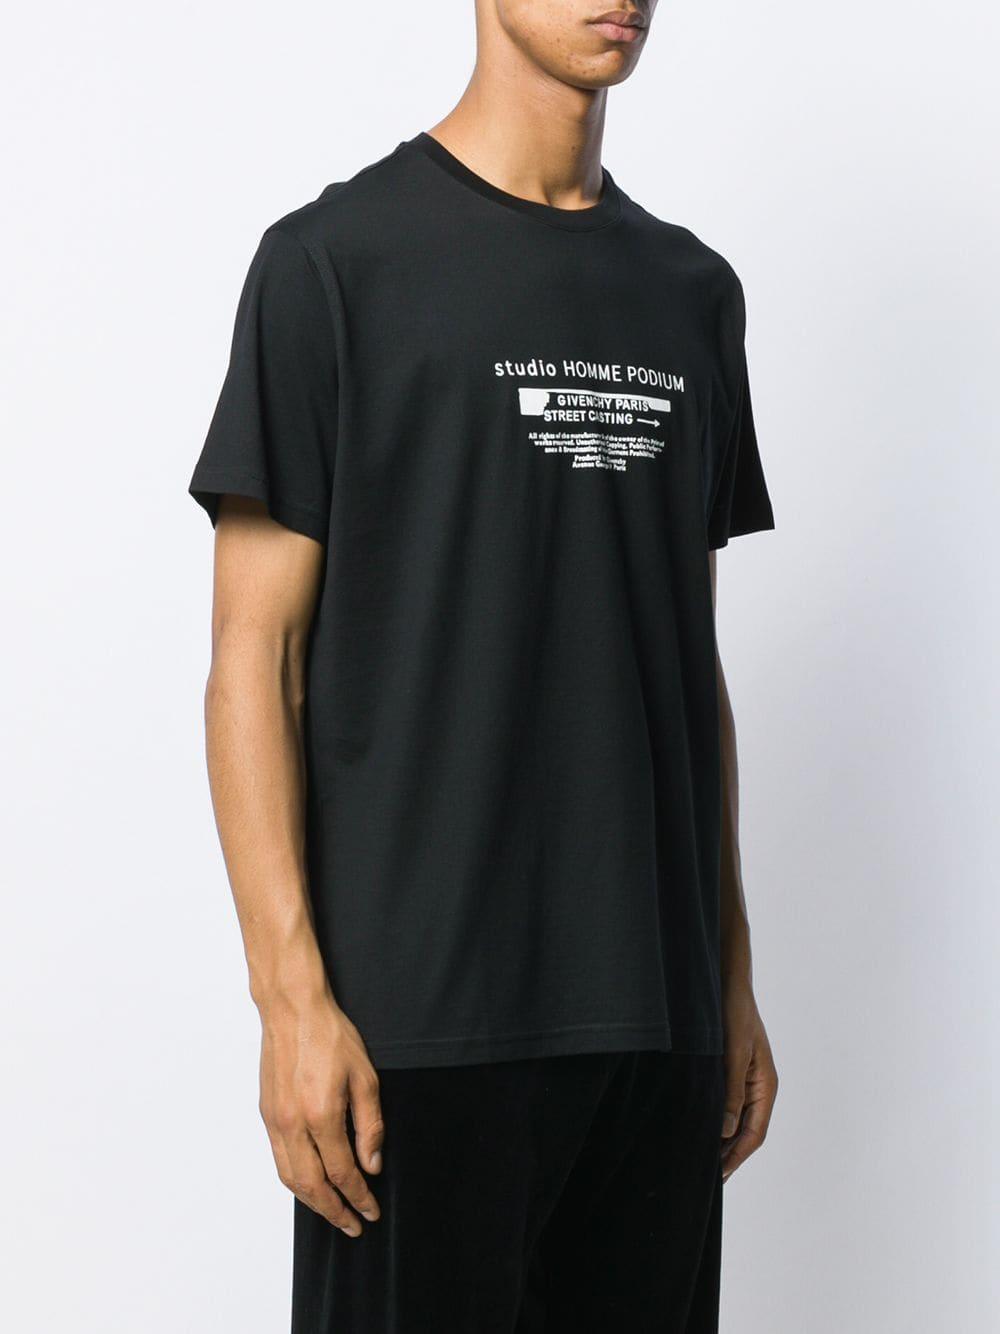 Givenchy Cotton Studio Homme Podium Printed T-shirt in Black for Men - Lyst